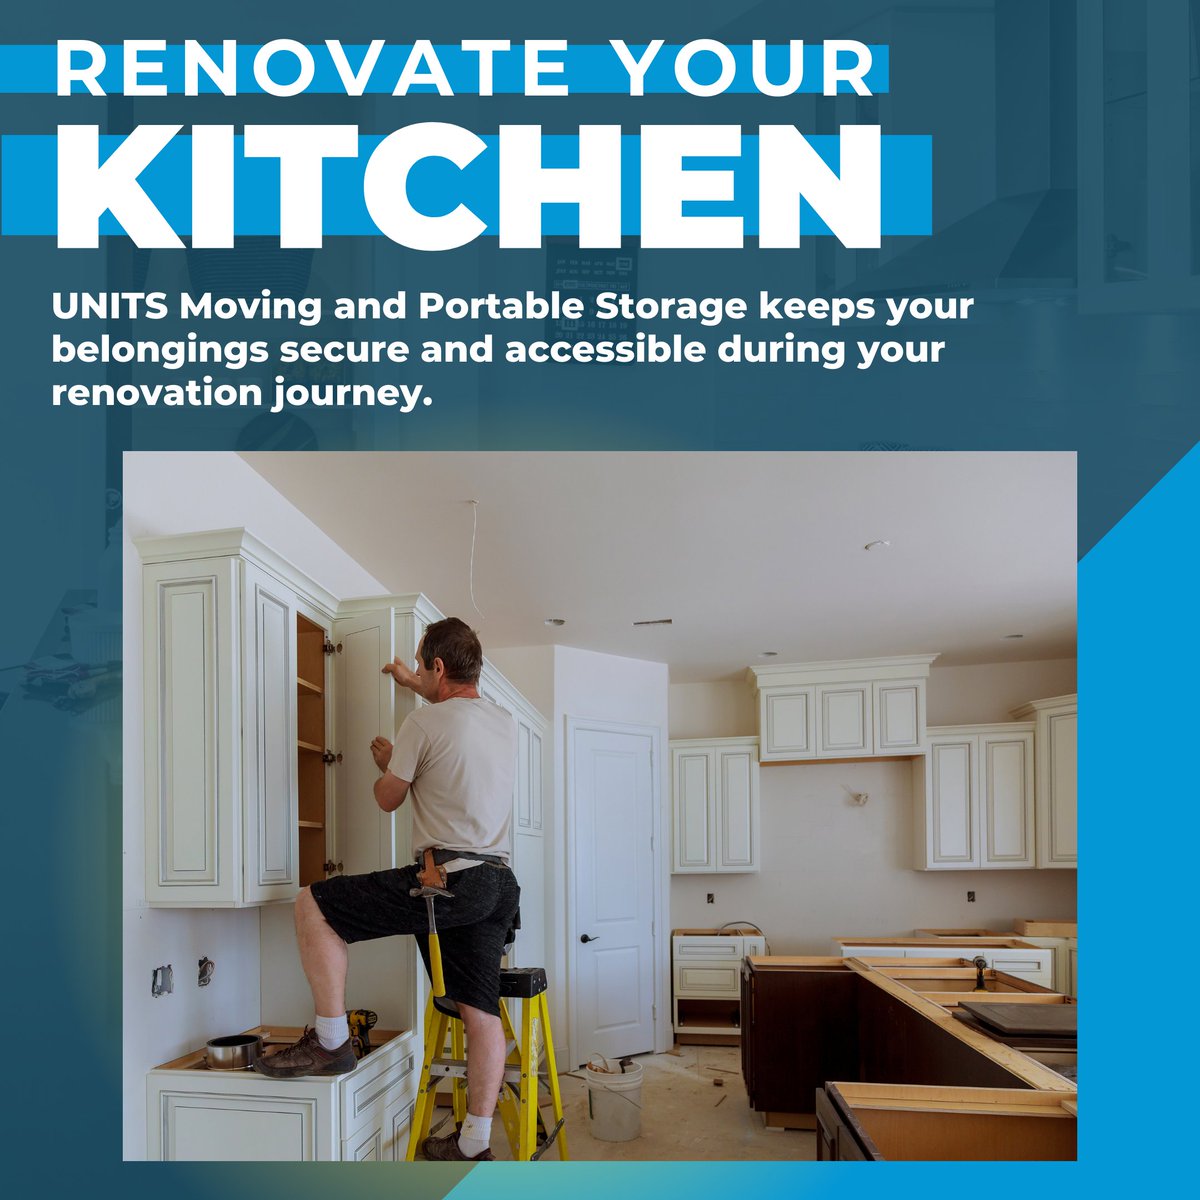 Kitchen renovation made simple with UNITS Moving and Portable Storage! 🛠️ Store your belongings safely and conveniently as you transform your space. Get started today! #UNITSStorage #KitchenUpgrade #Remodeling